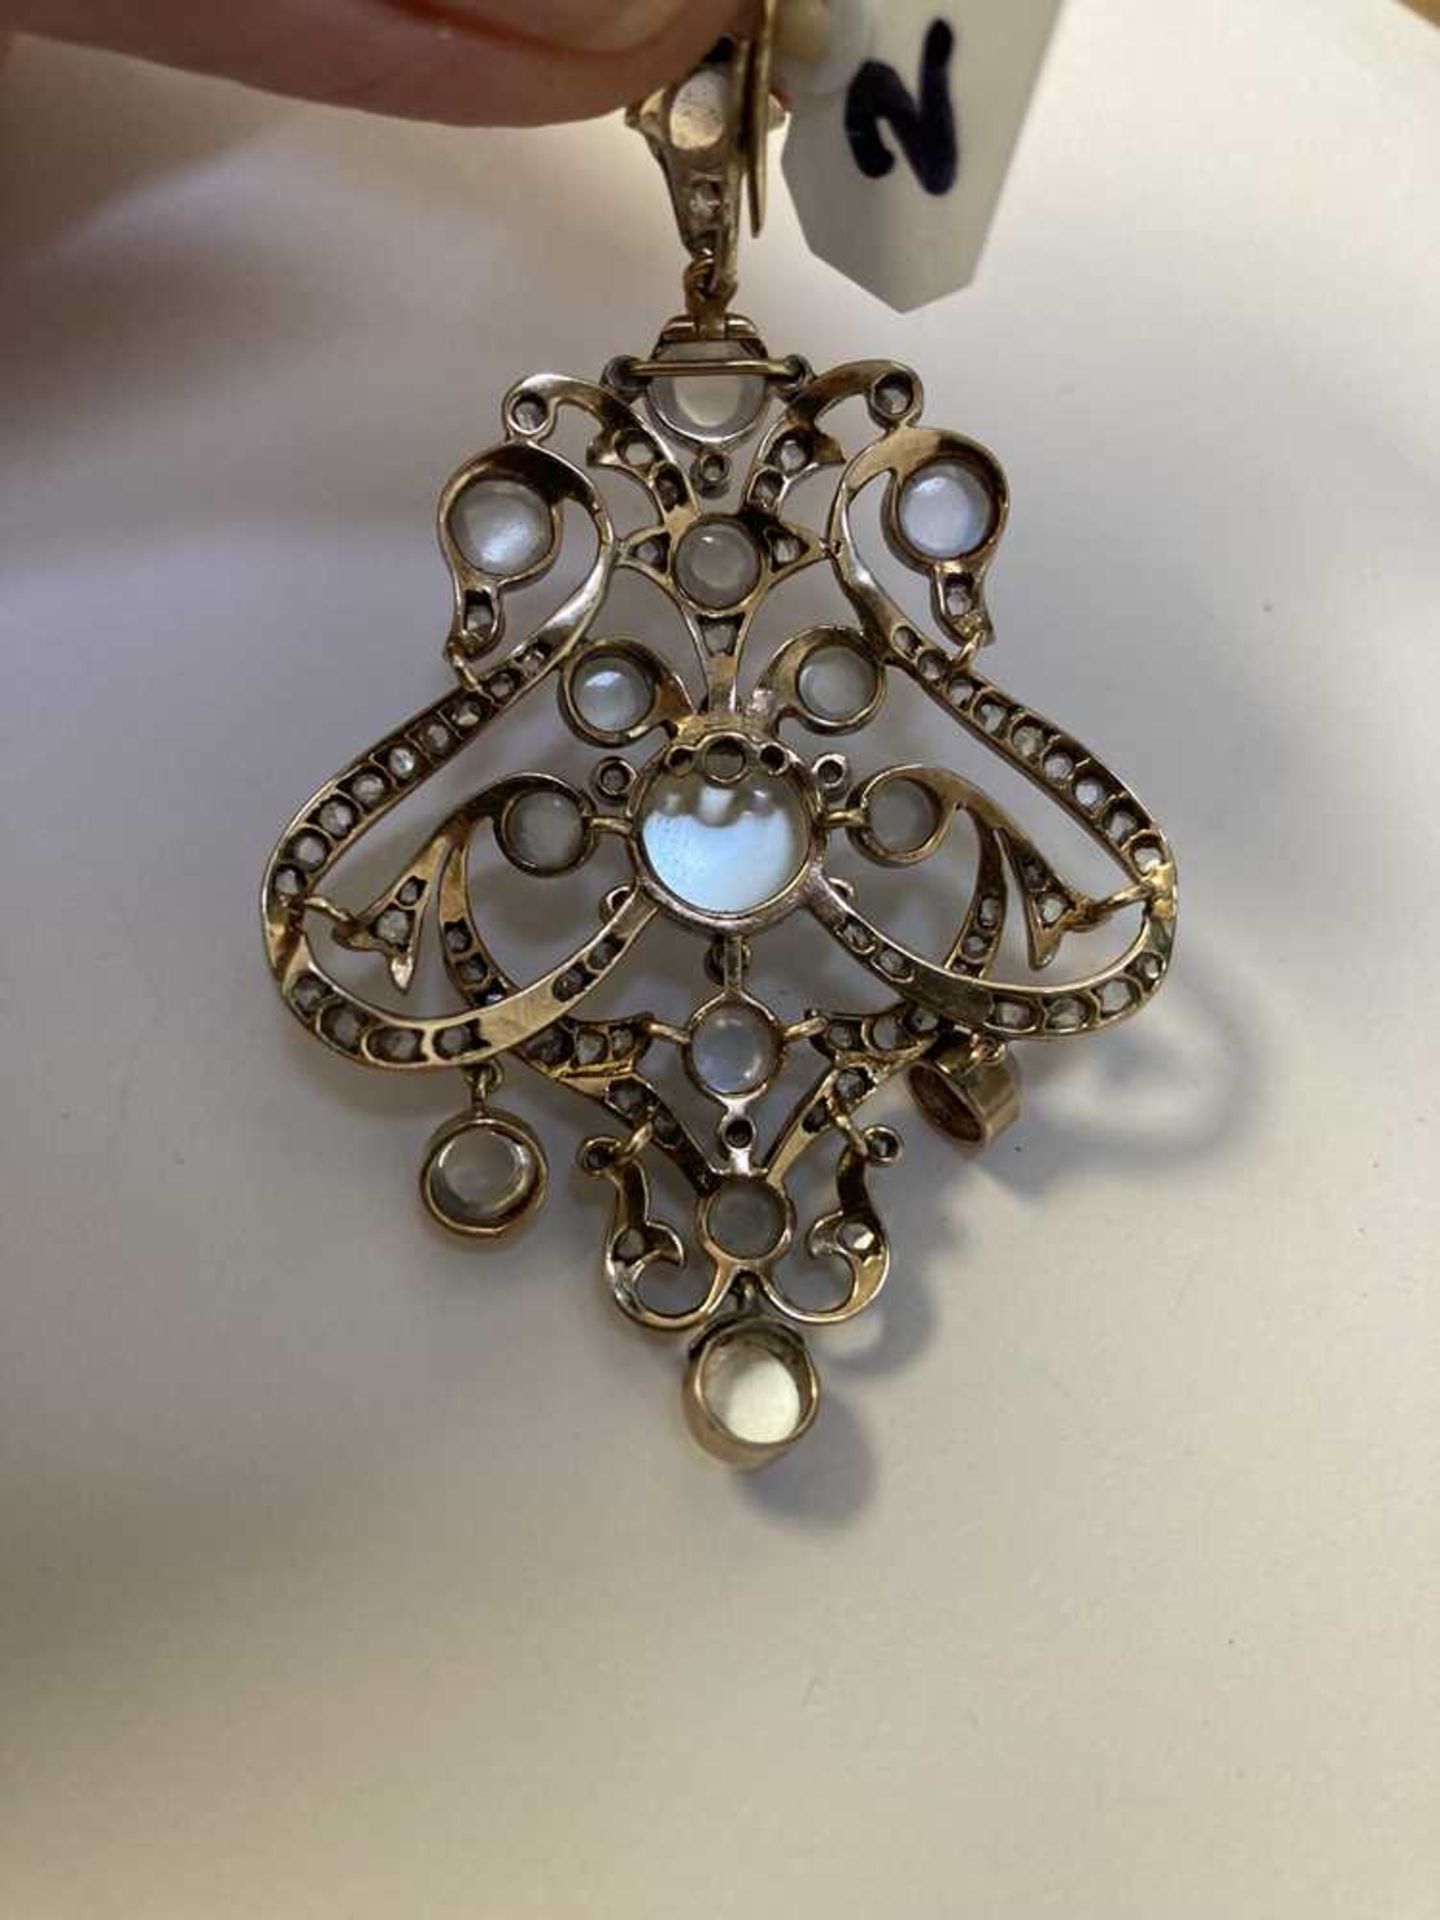 A late 19th century moonstone and diamond pendant - Image 2 of 3